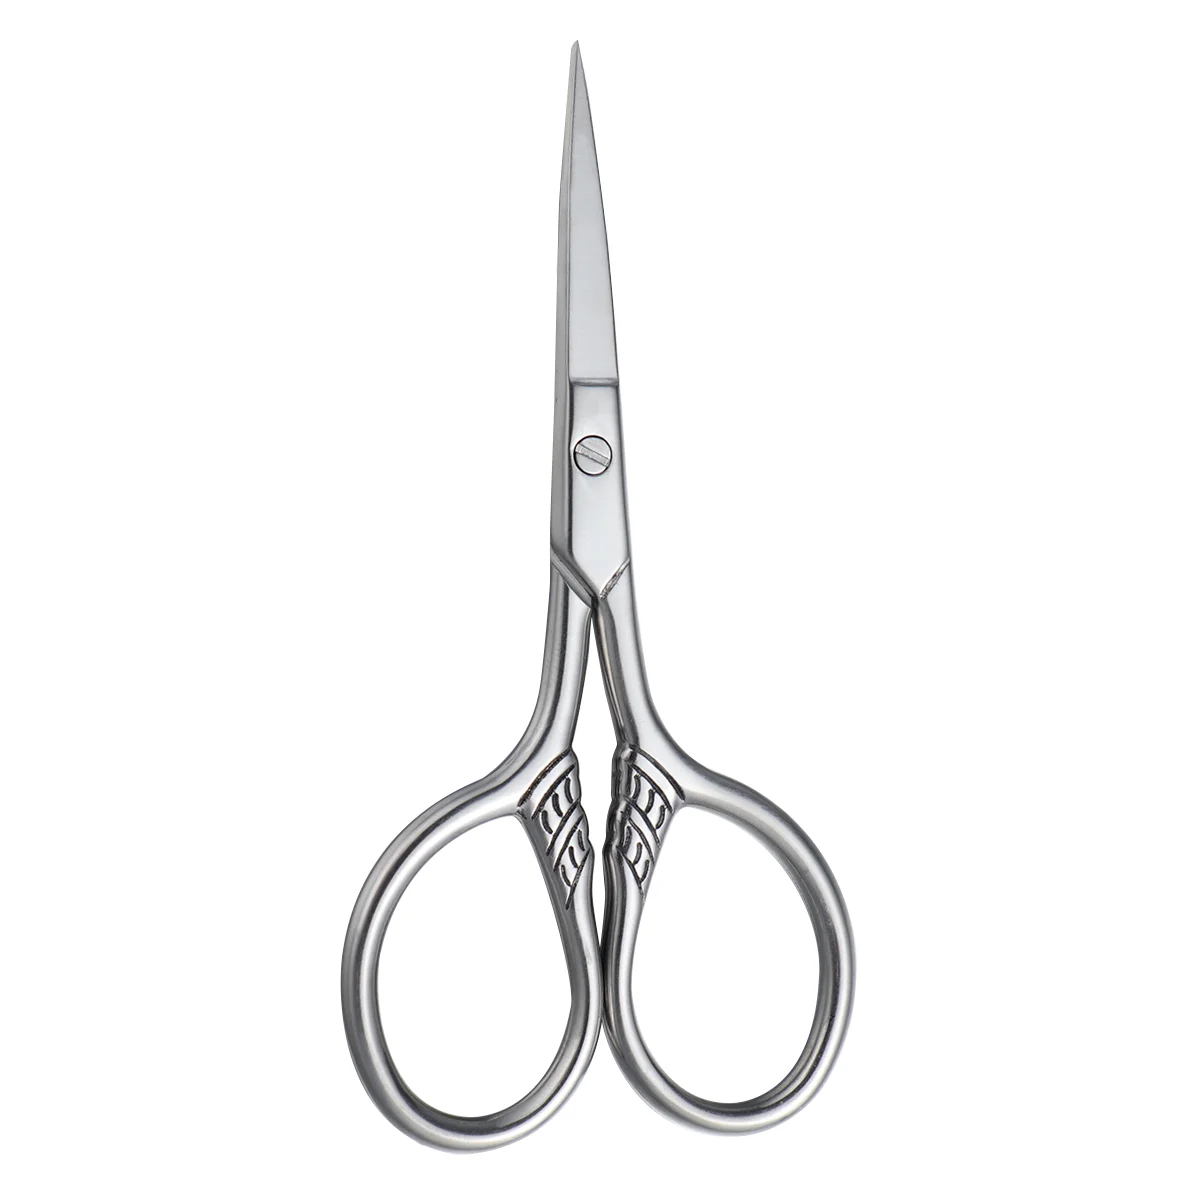 Stainless Steel Nose Hair& Beard Trimming Mustache Trimming Shear Professional Hair Scissor Small Grooming for Men Silver